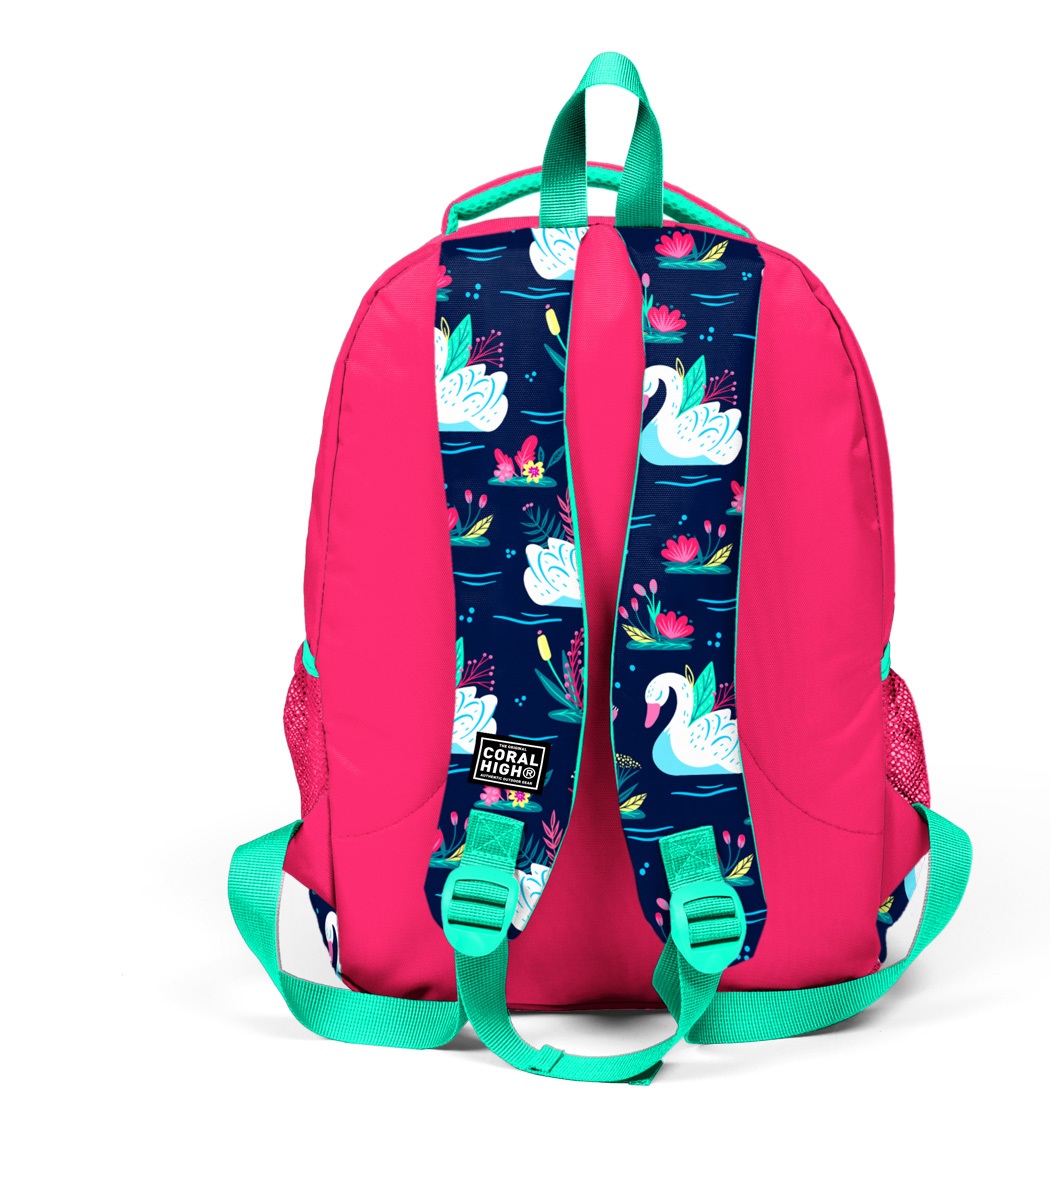 Coral High Kids Three Compartment School Backpack - Neon Coral Navy Blue Swan Pattern